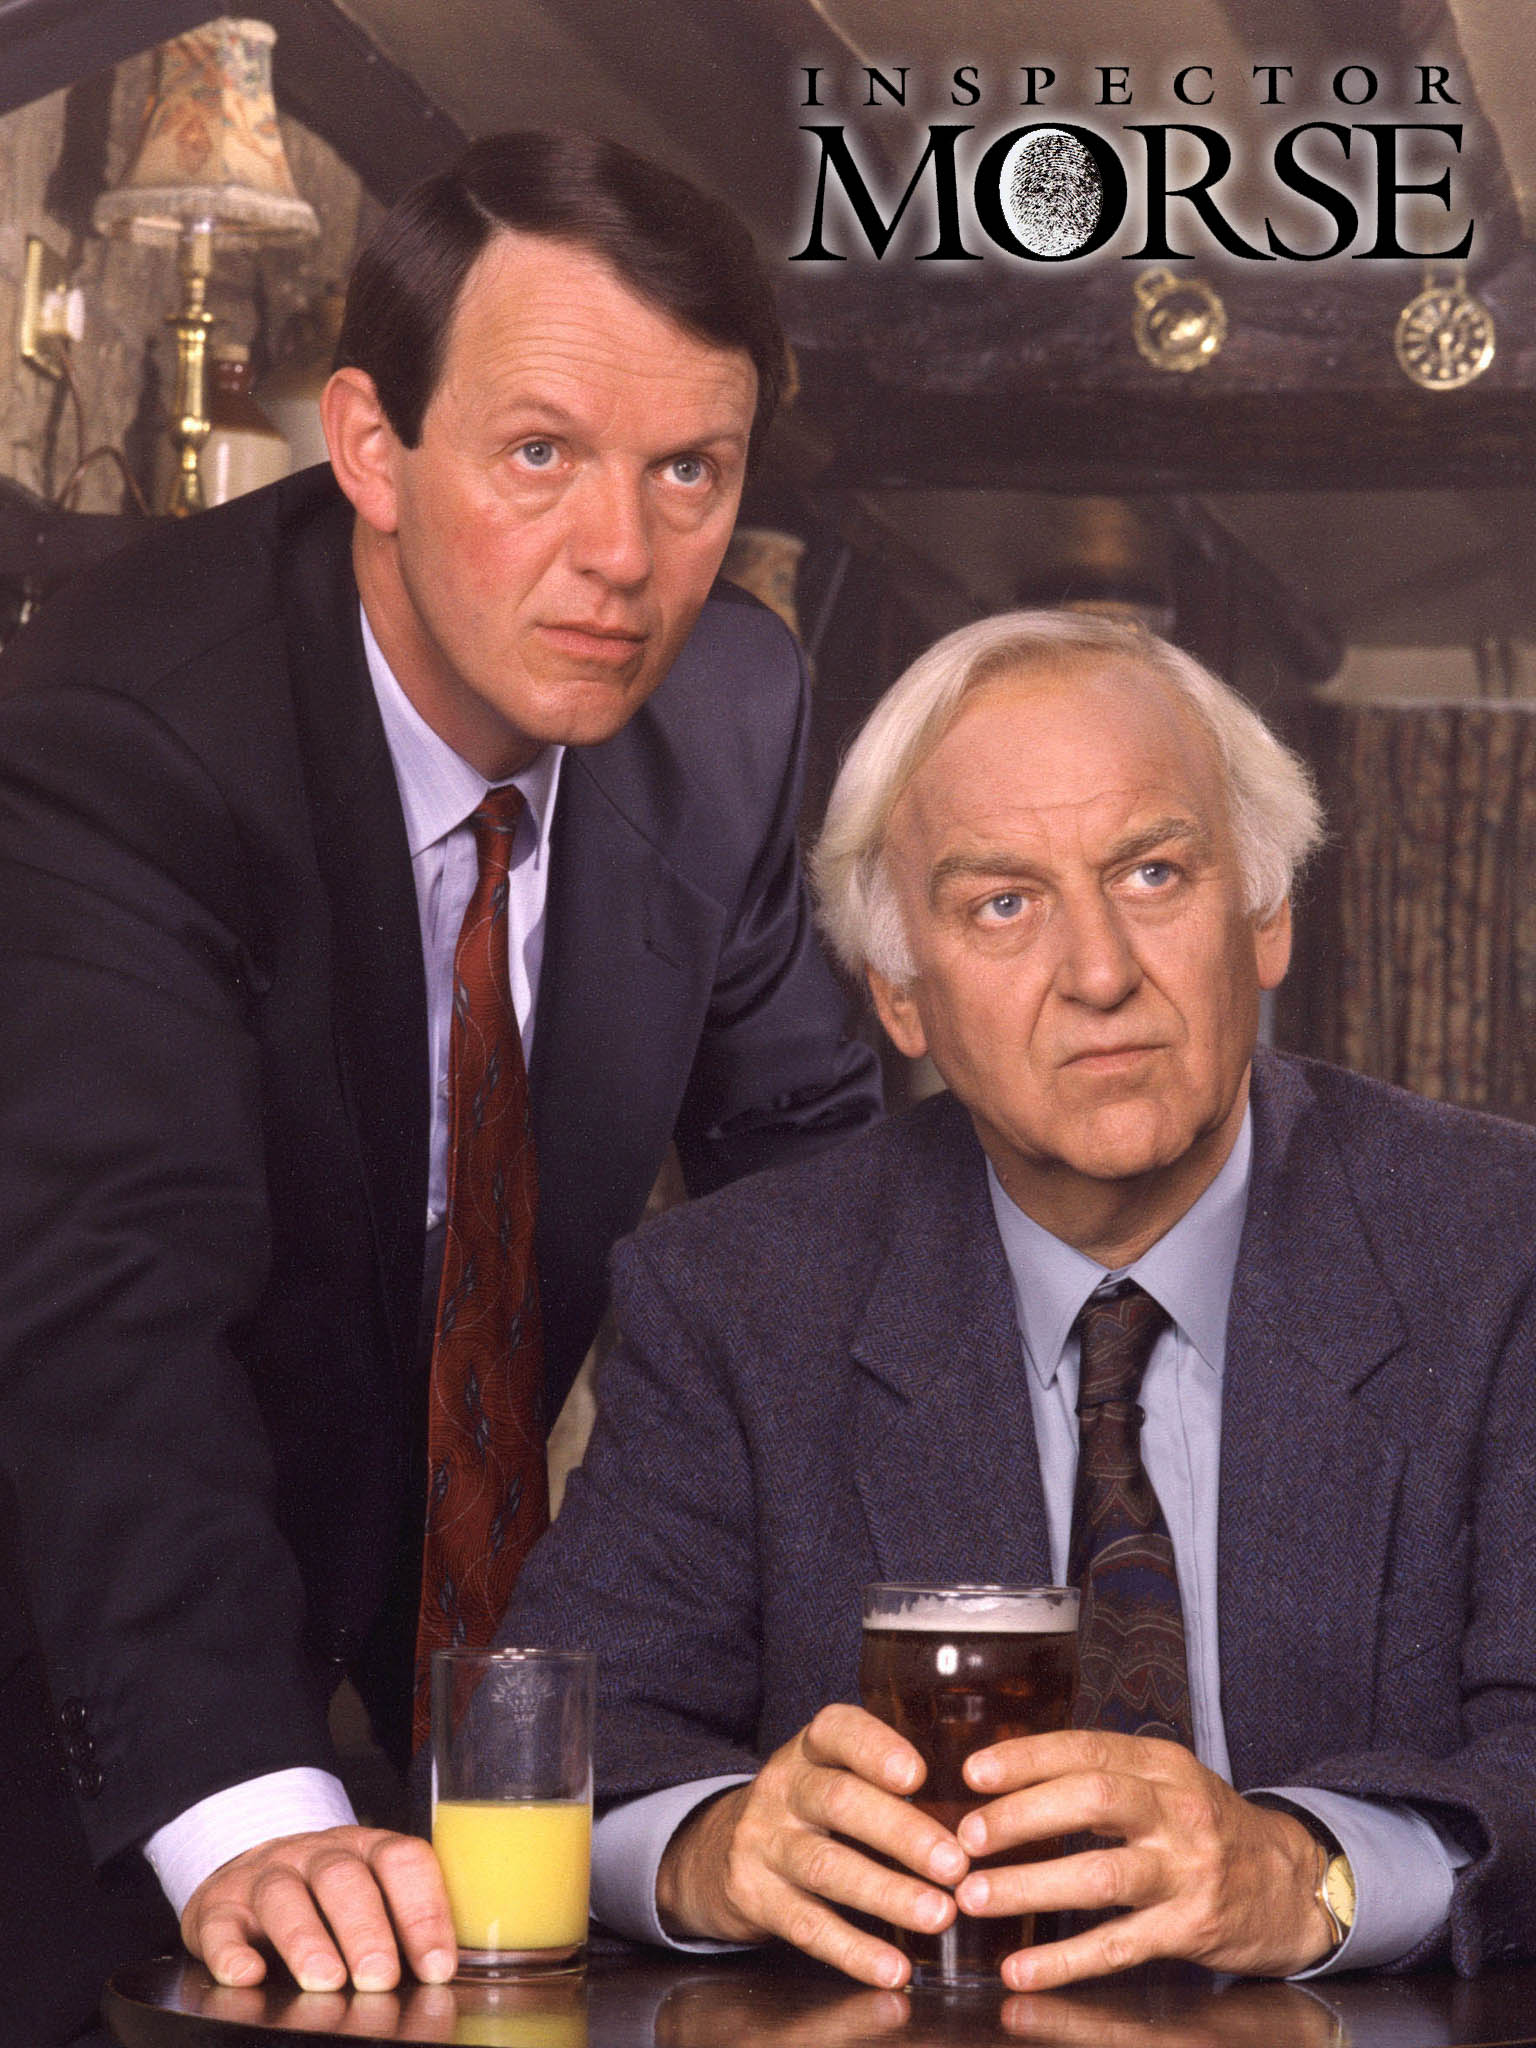 who plays inspector morse